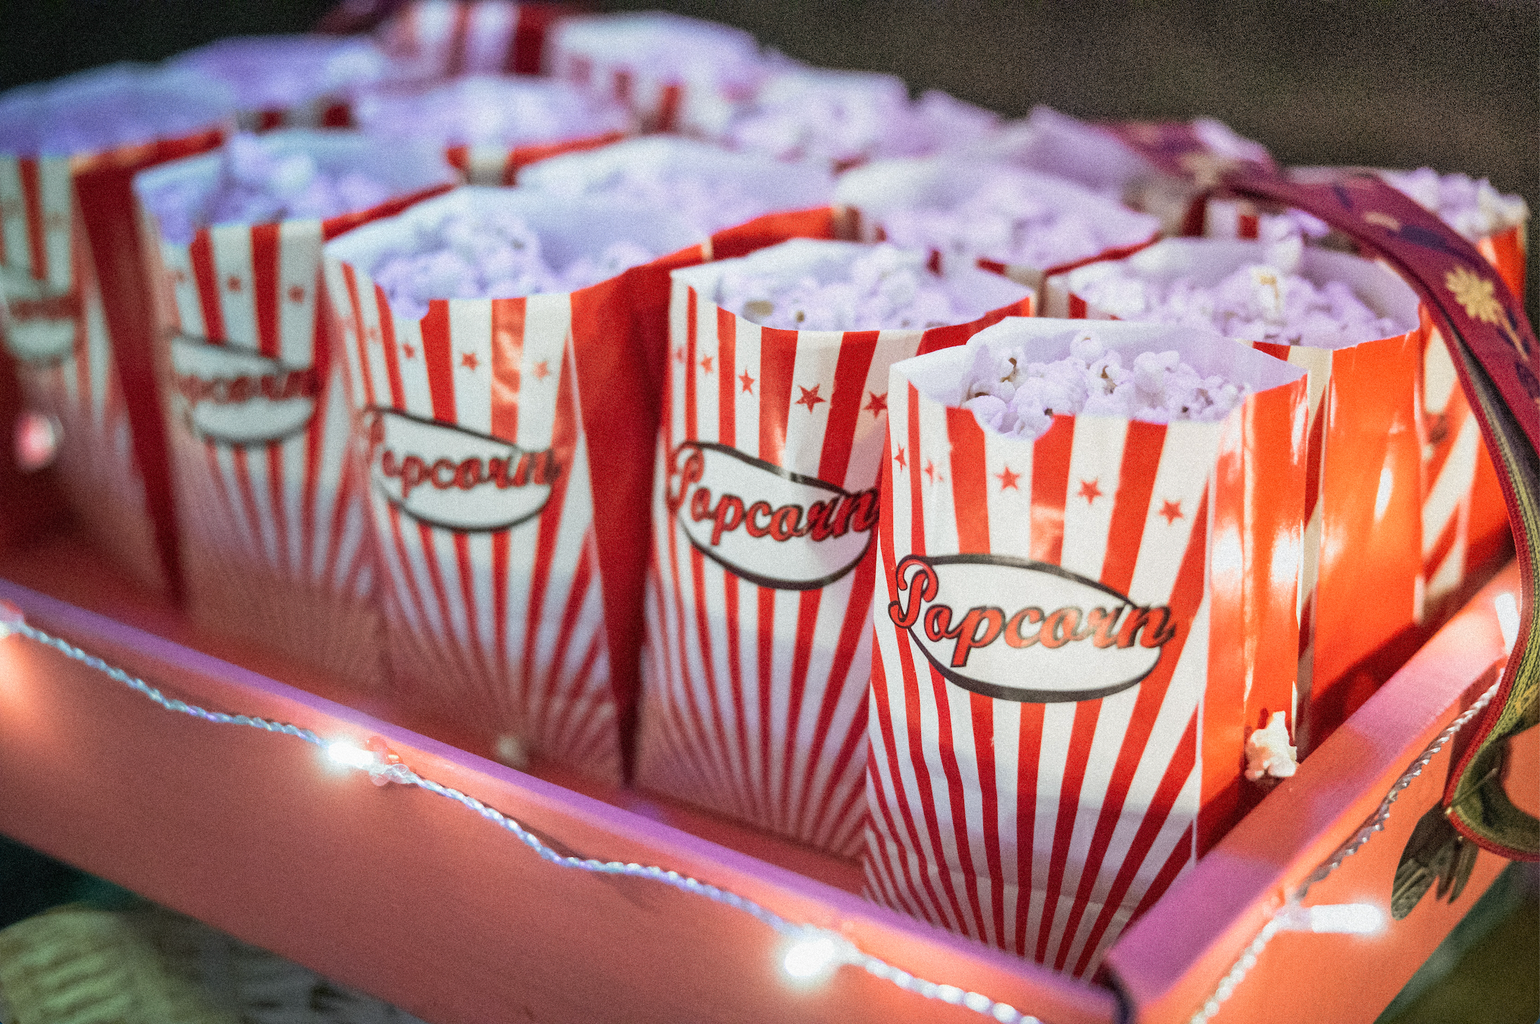 bags filled with popcorn in a line